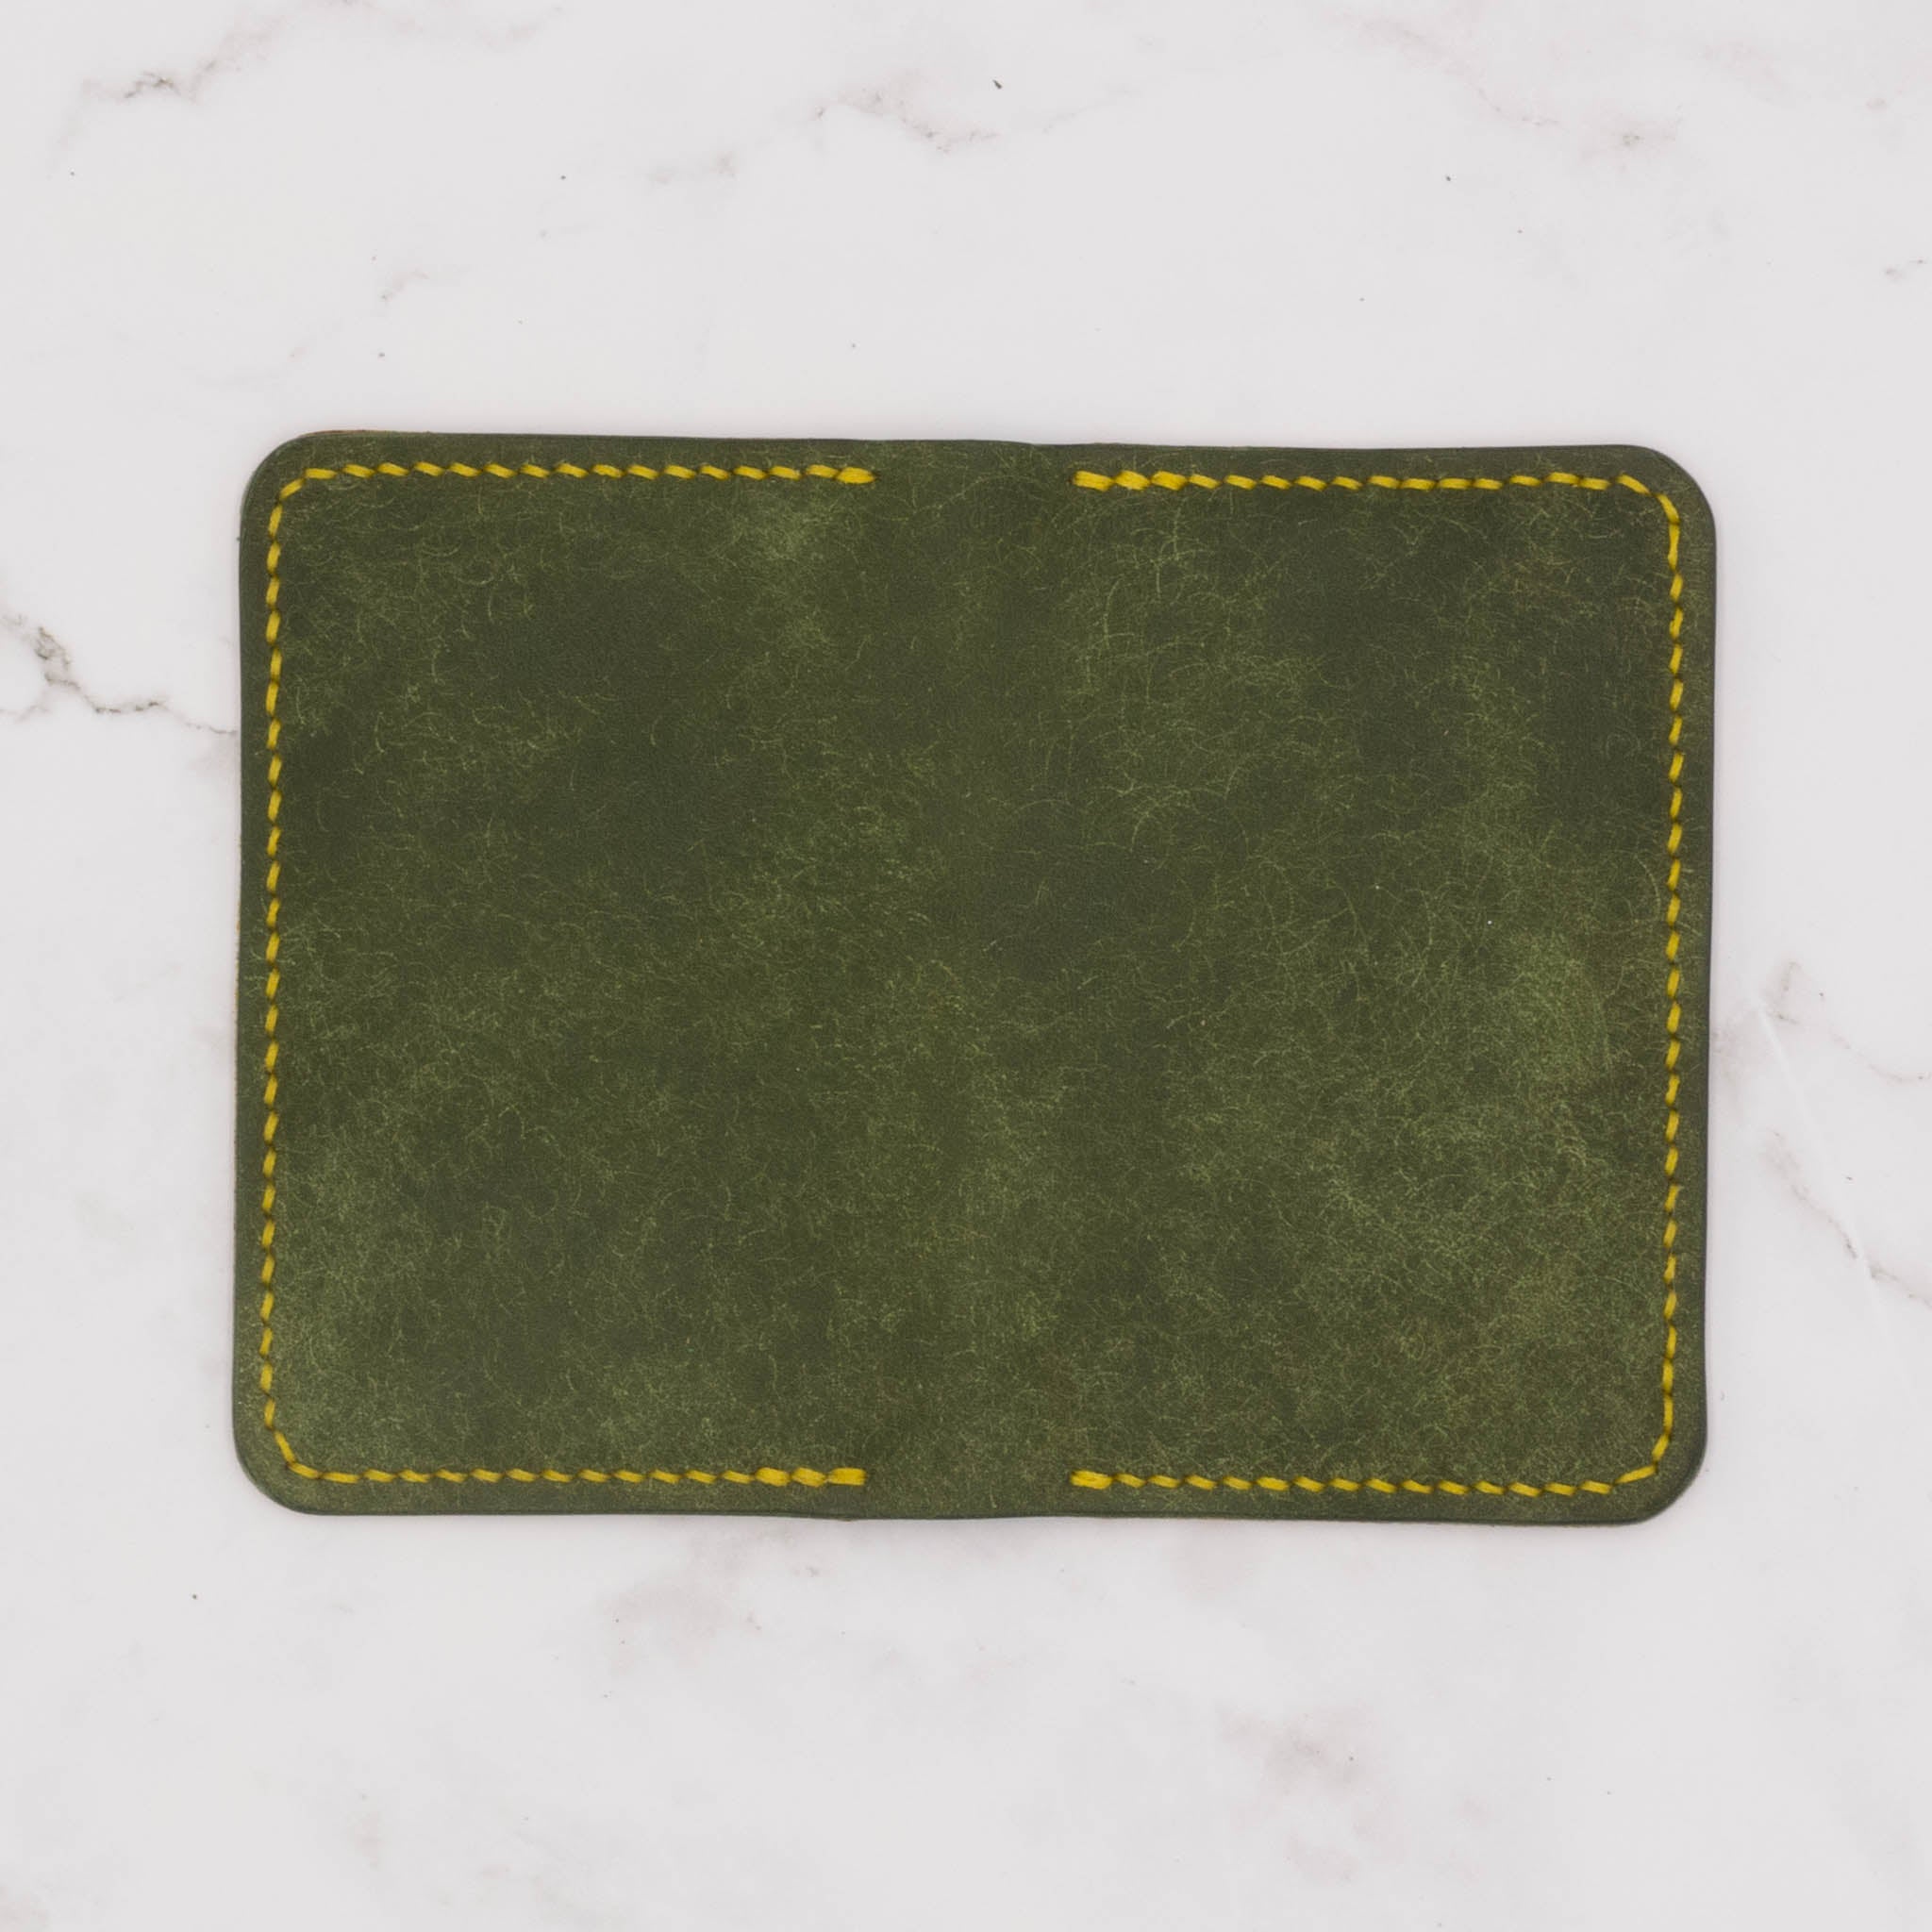 Handcrafted Leather Ultra Slim Bifold Wallet - Olive Green and Sunflower Yellow